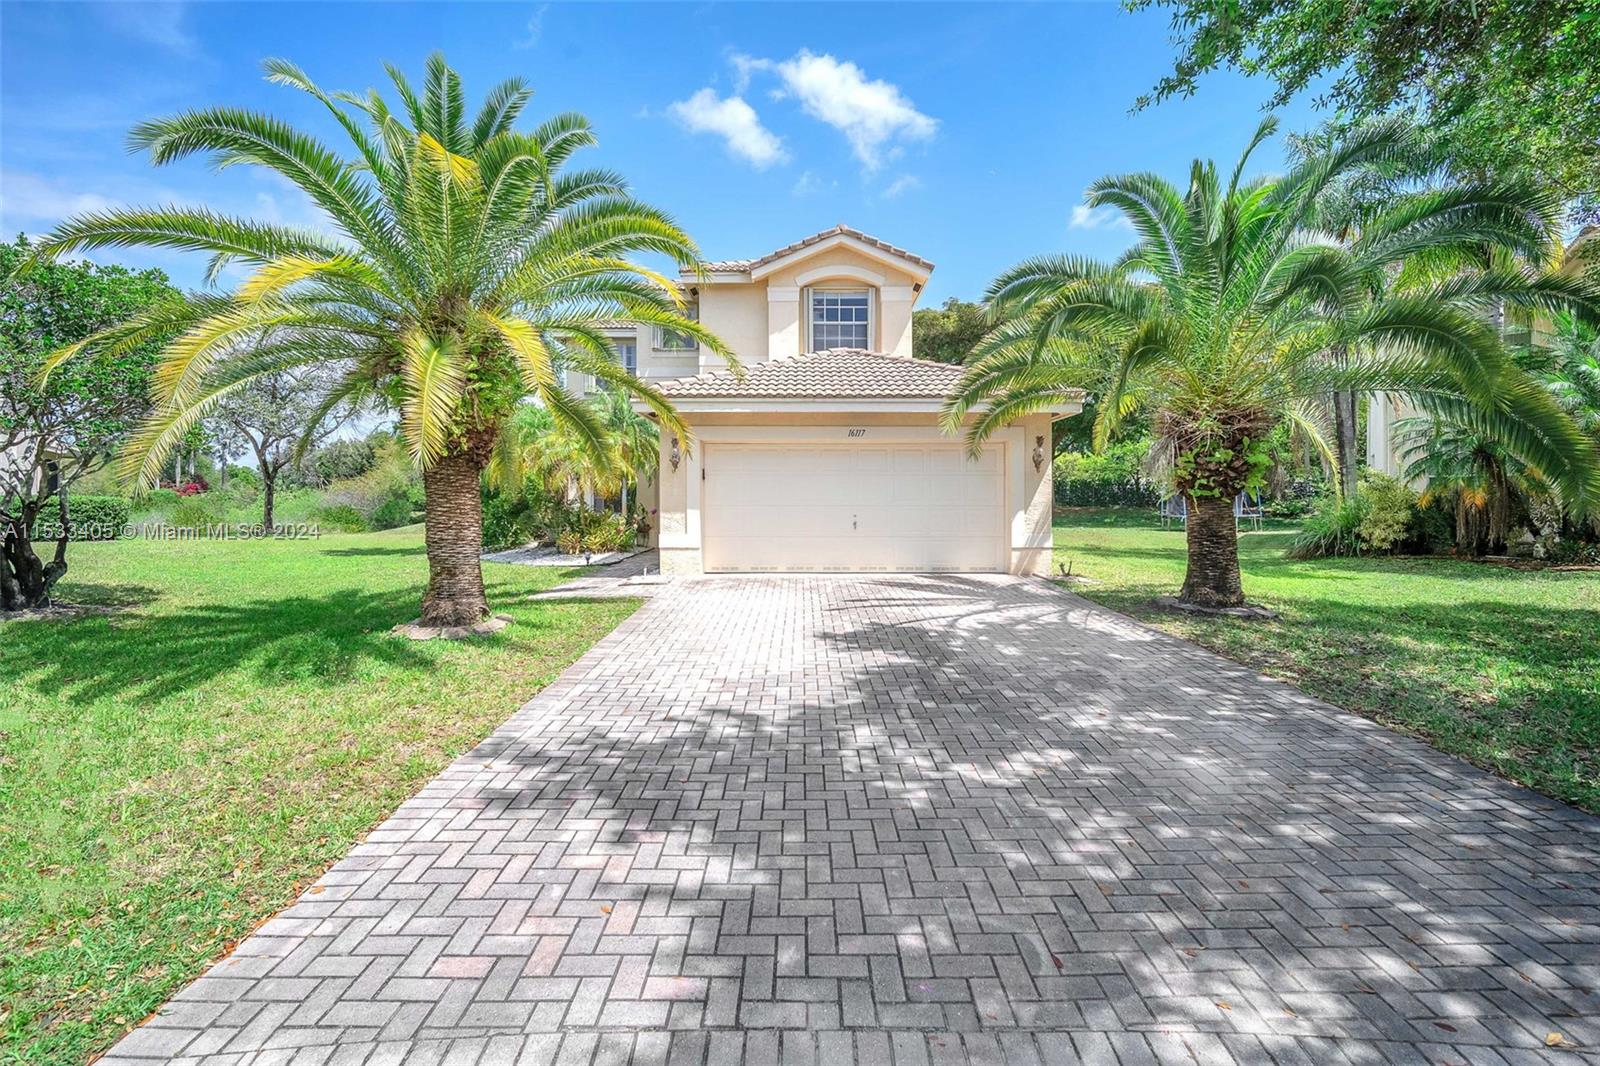 Property for Sale at 16117 Sw 27th St St, Miramar, Broward County, Florida - Bedrooms: 4 
Bathrooms: 3  - $672,875